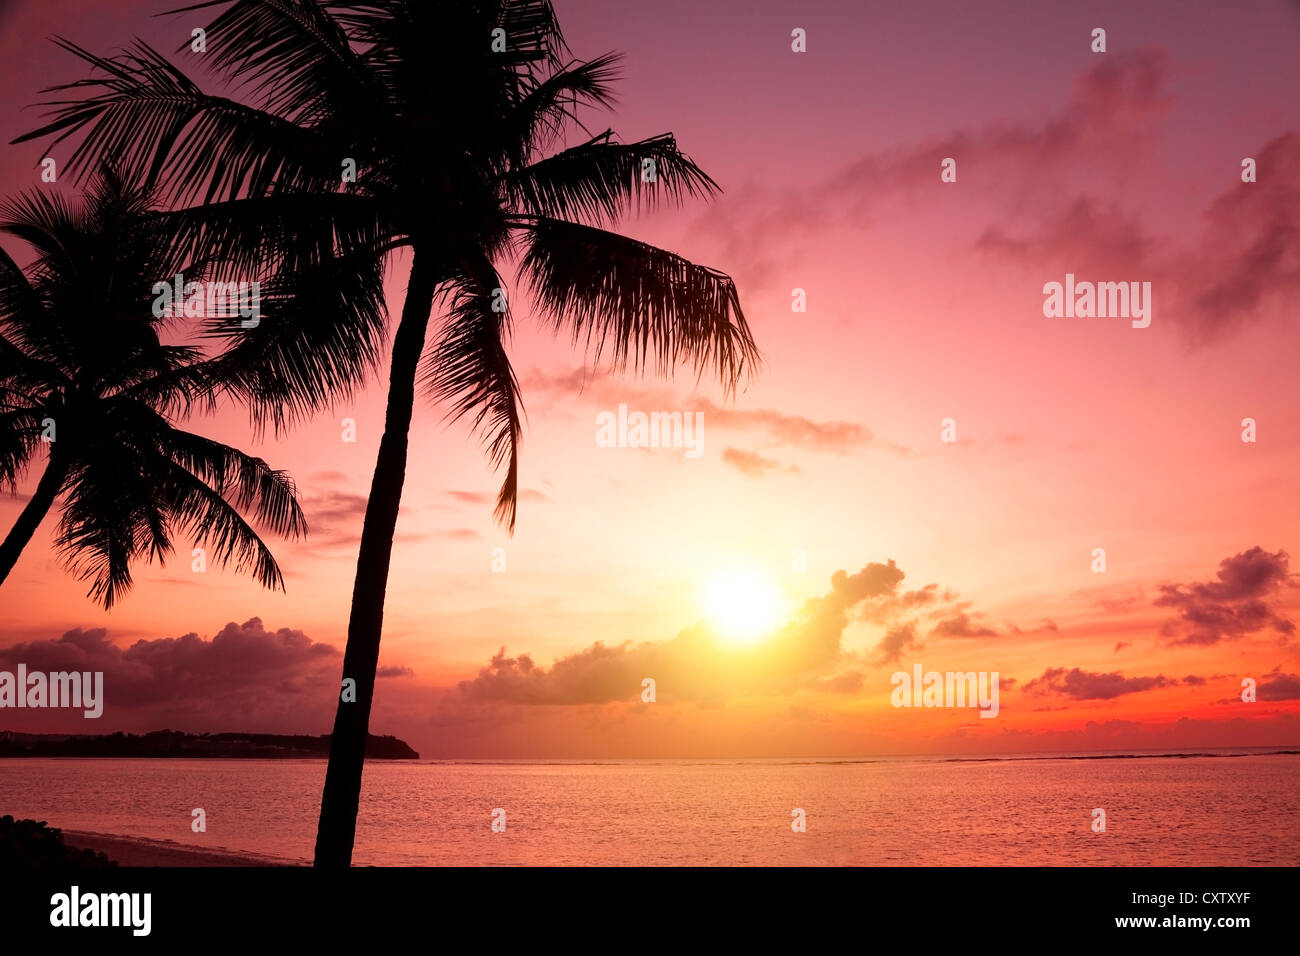 Palm Trees Silhouette At Sunset Stock Photo